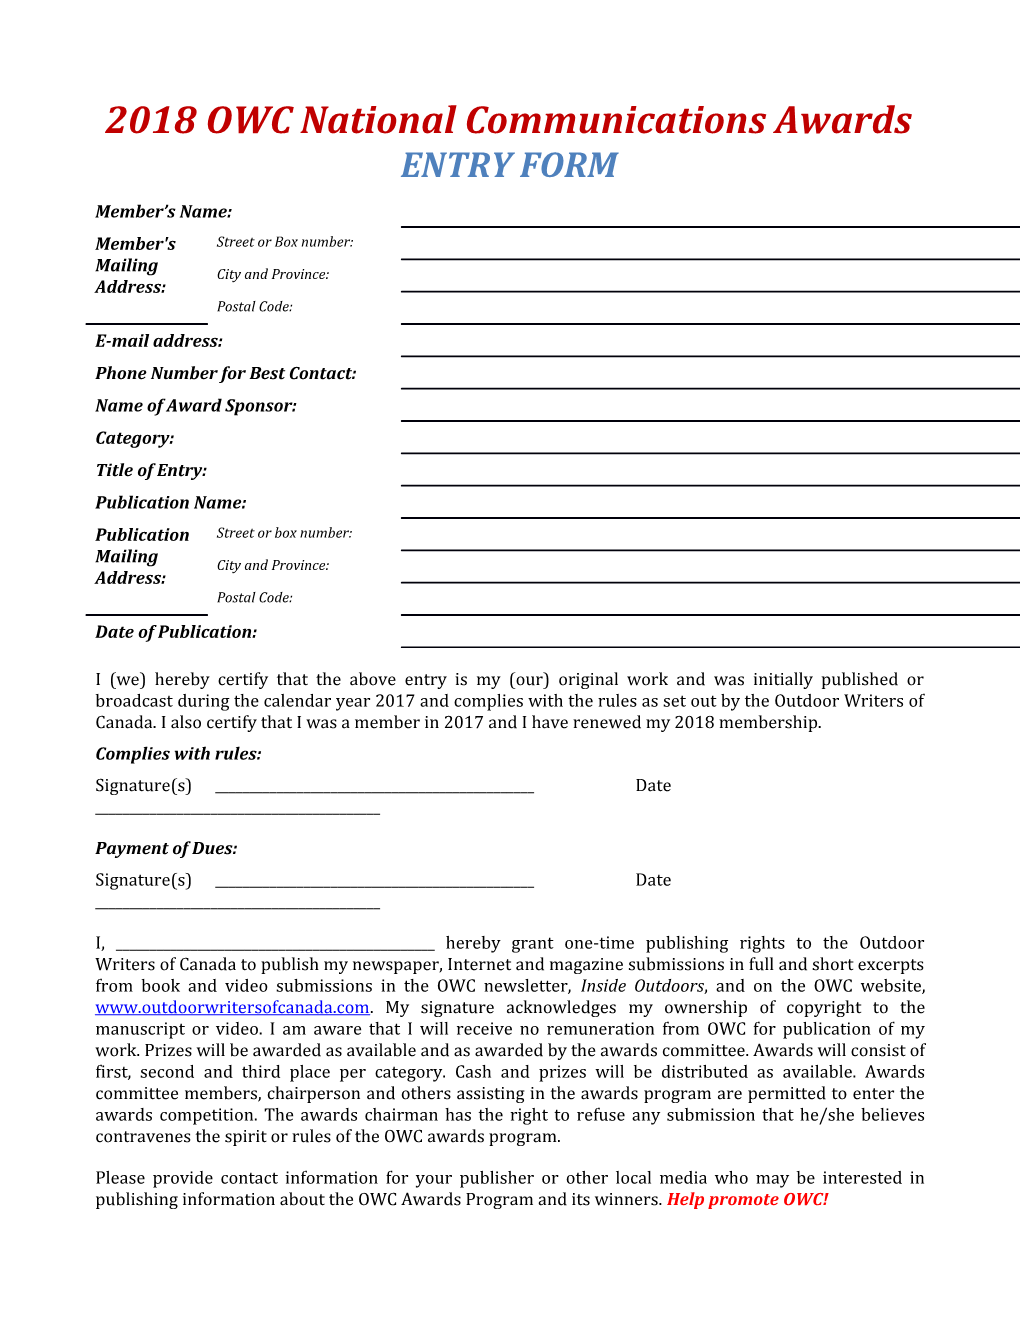 2007 OWC NATIONAL COMMUNICATIONS Entry Form